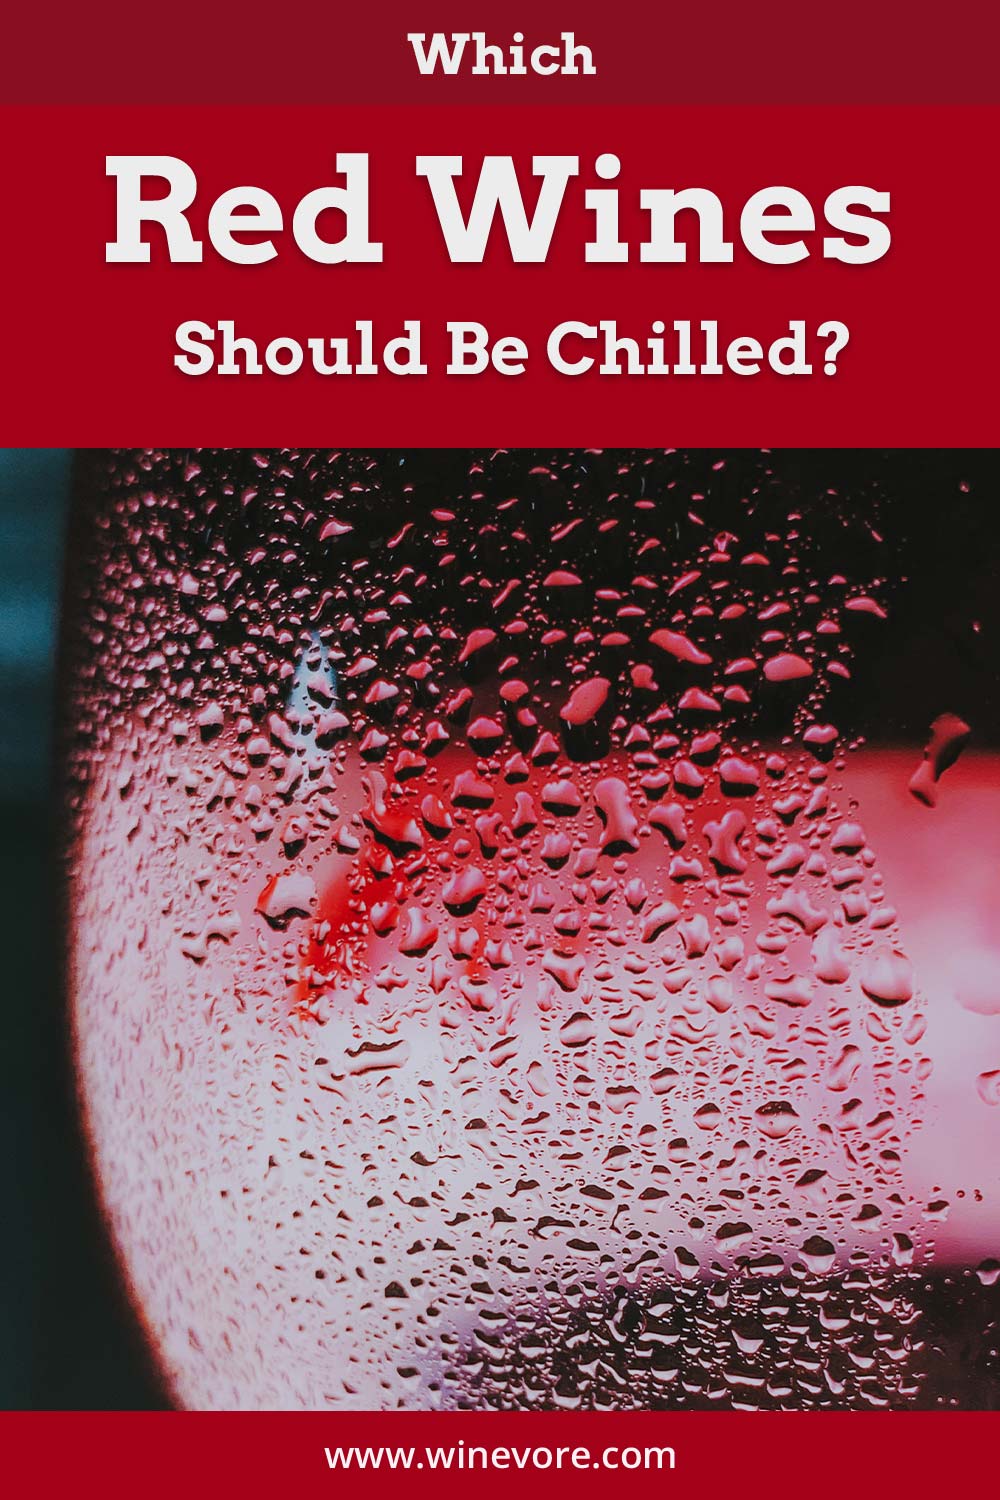 Water droplets on a wine glass - Which Red Wines Should Be Chilled?